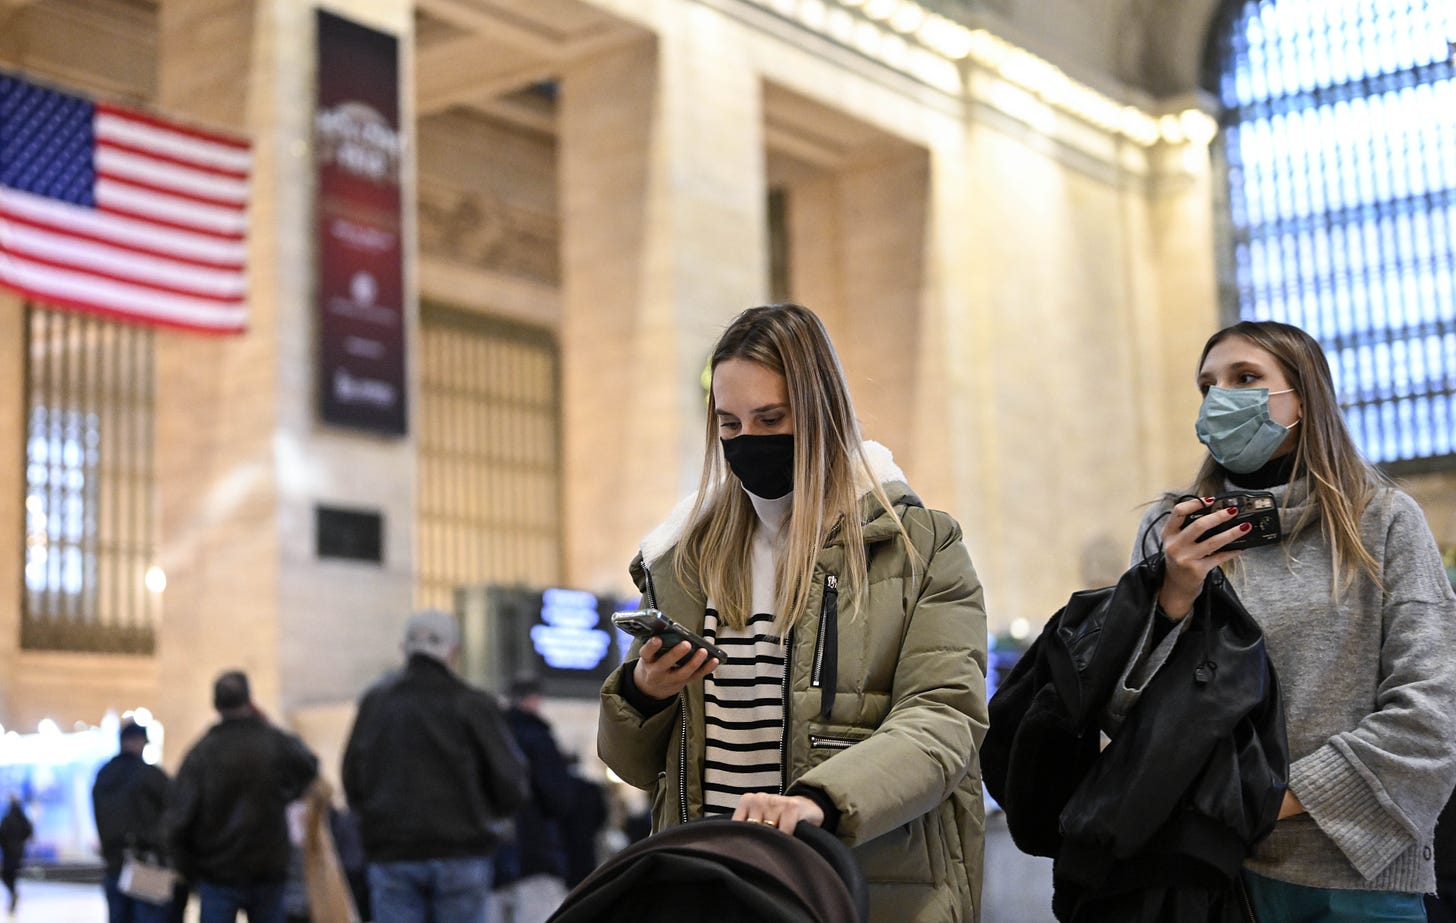 People wear masks in New York City's Grand Central Station.